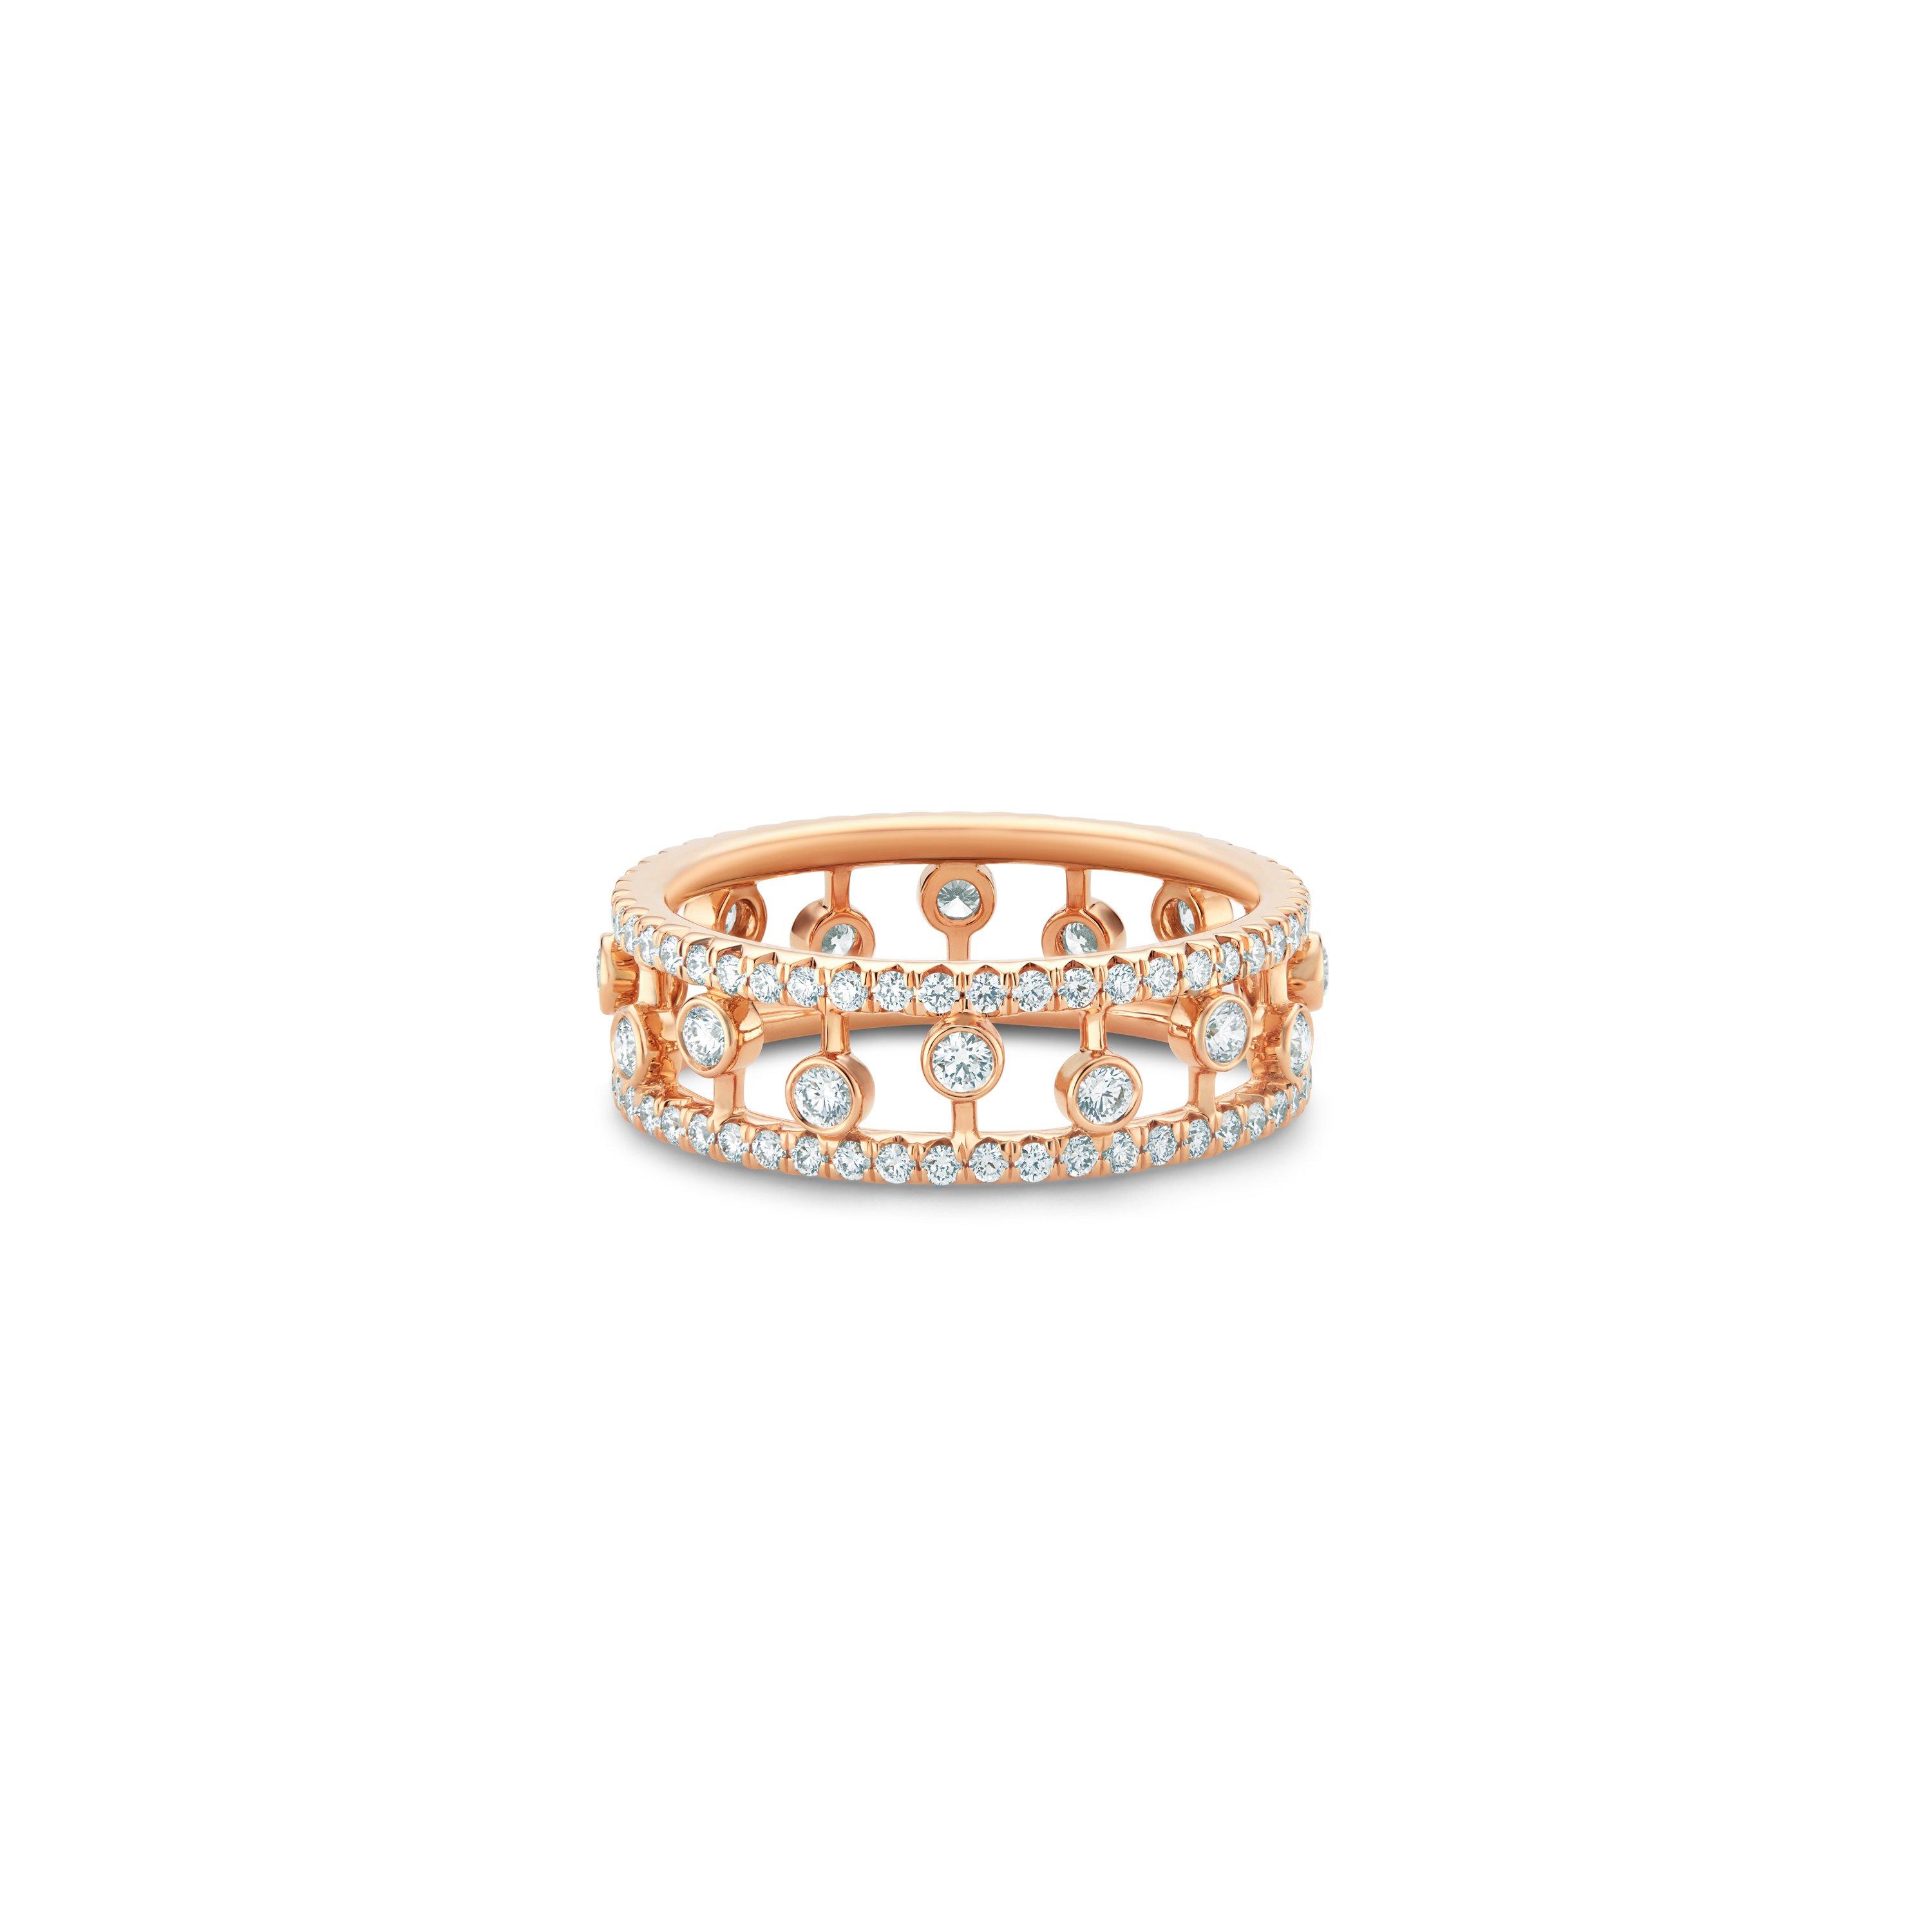 Dewdrop band in rose gold, image 1